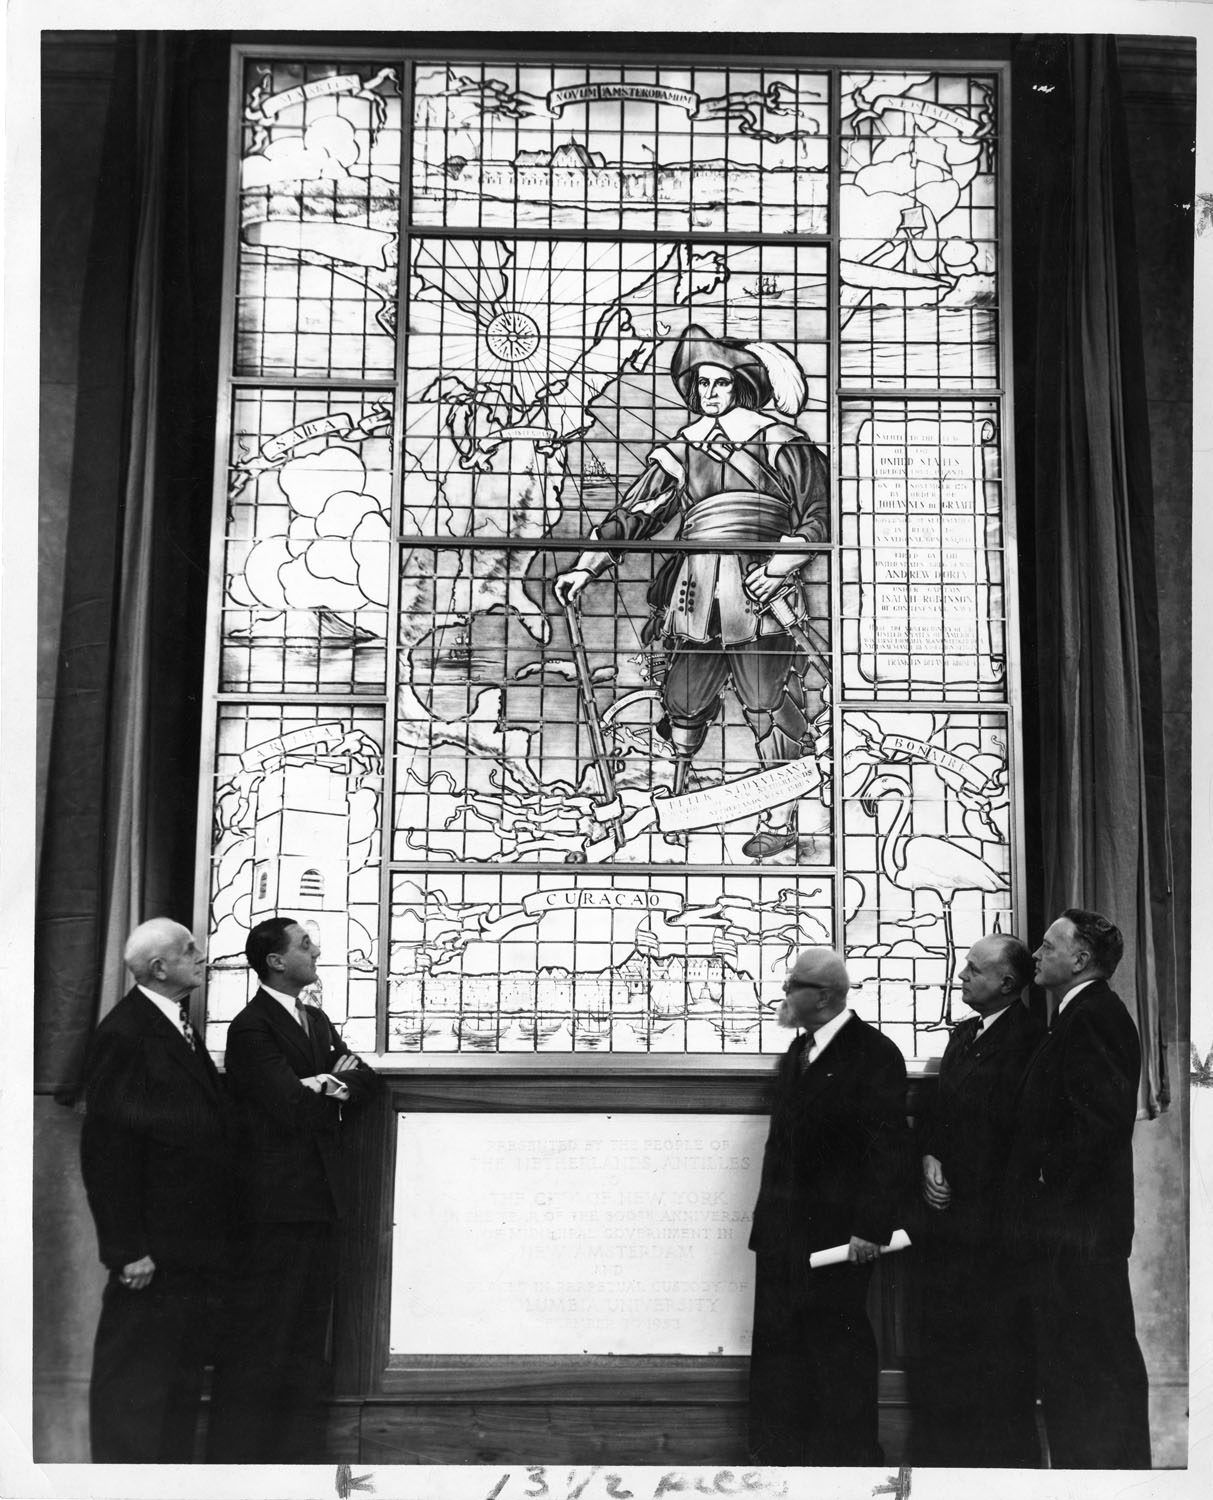 Unveiling of the "imperialist" stained glass window featuring Peter Stuyvesant in 1954